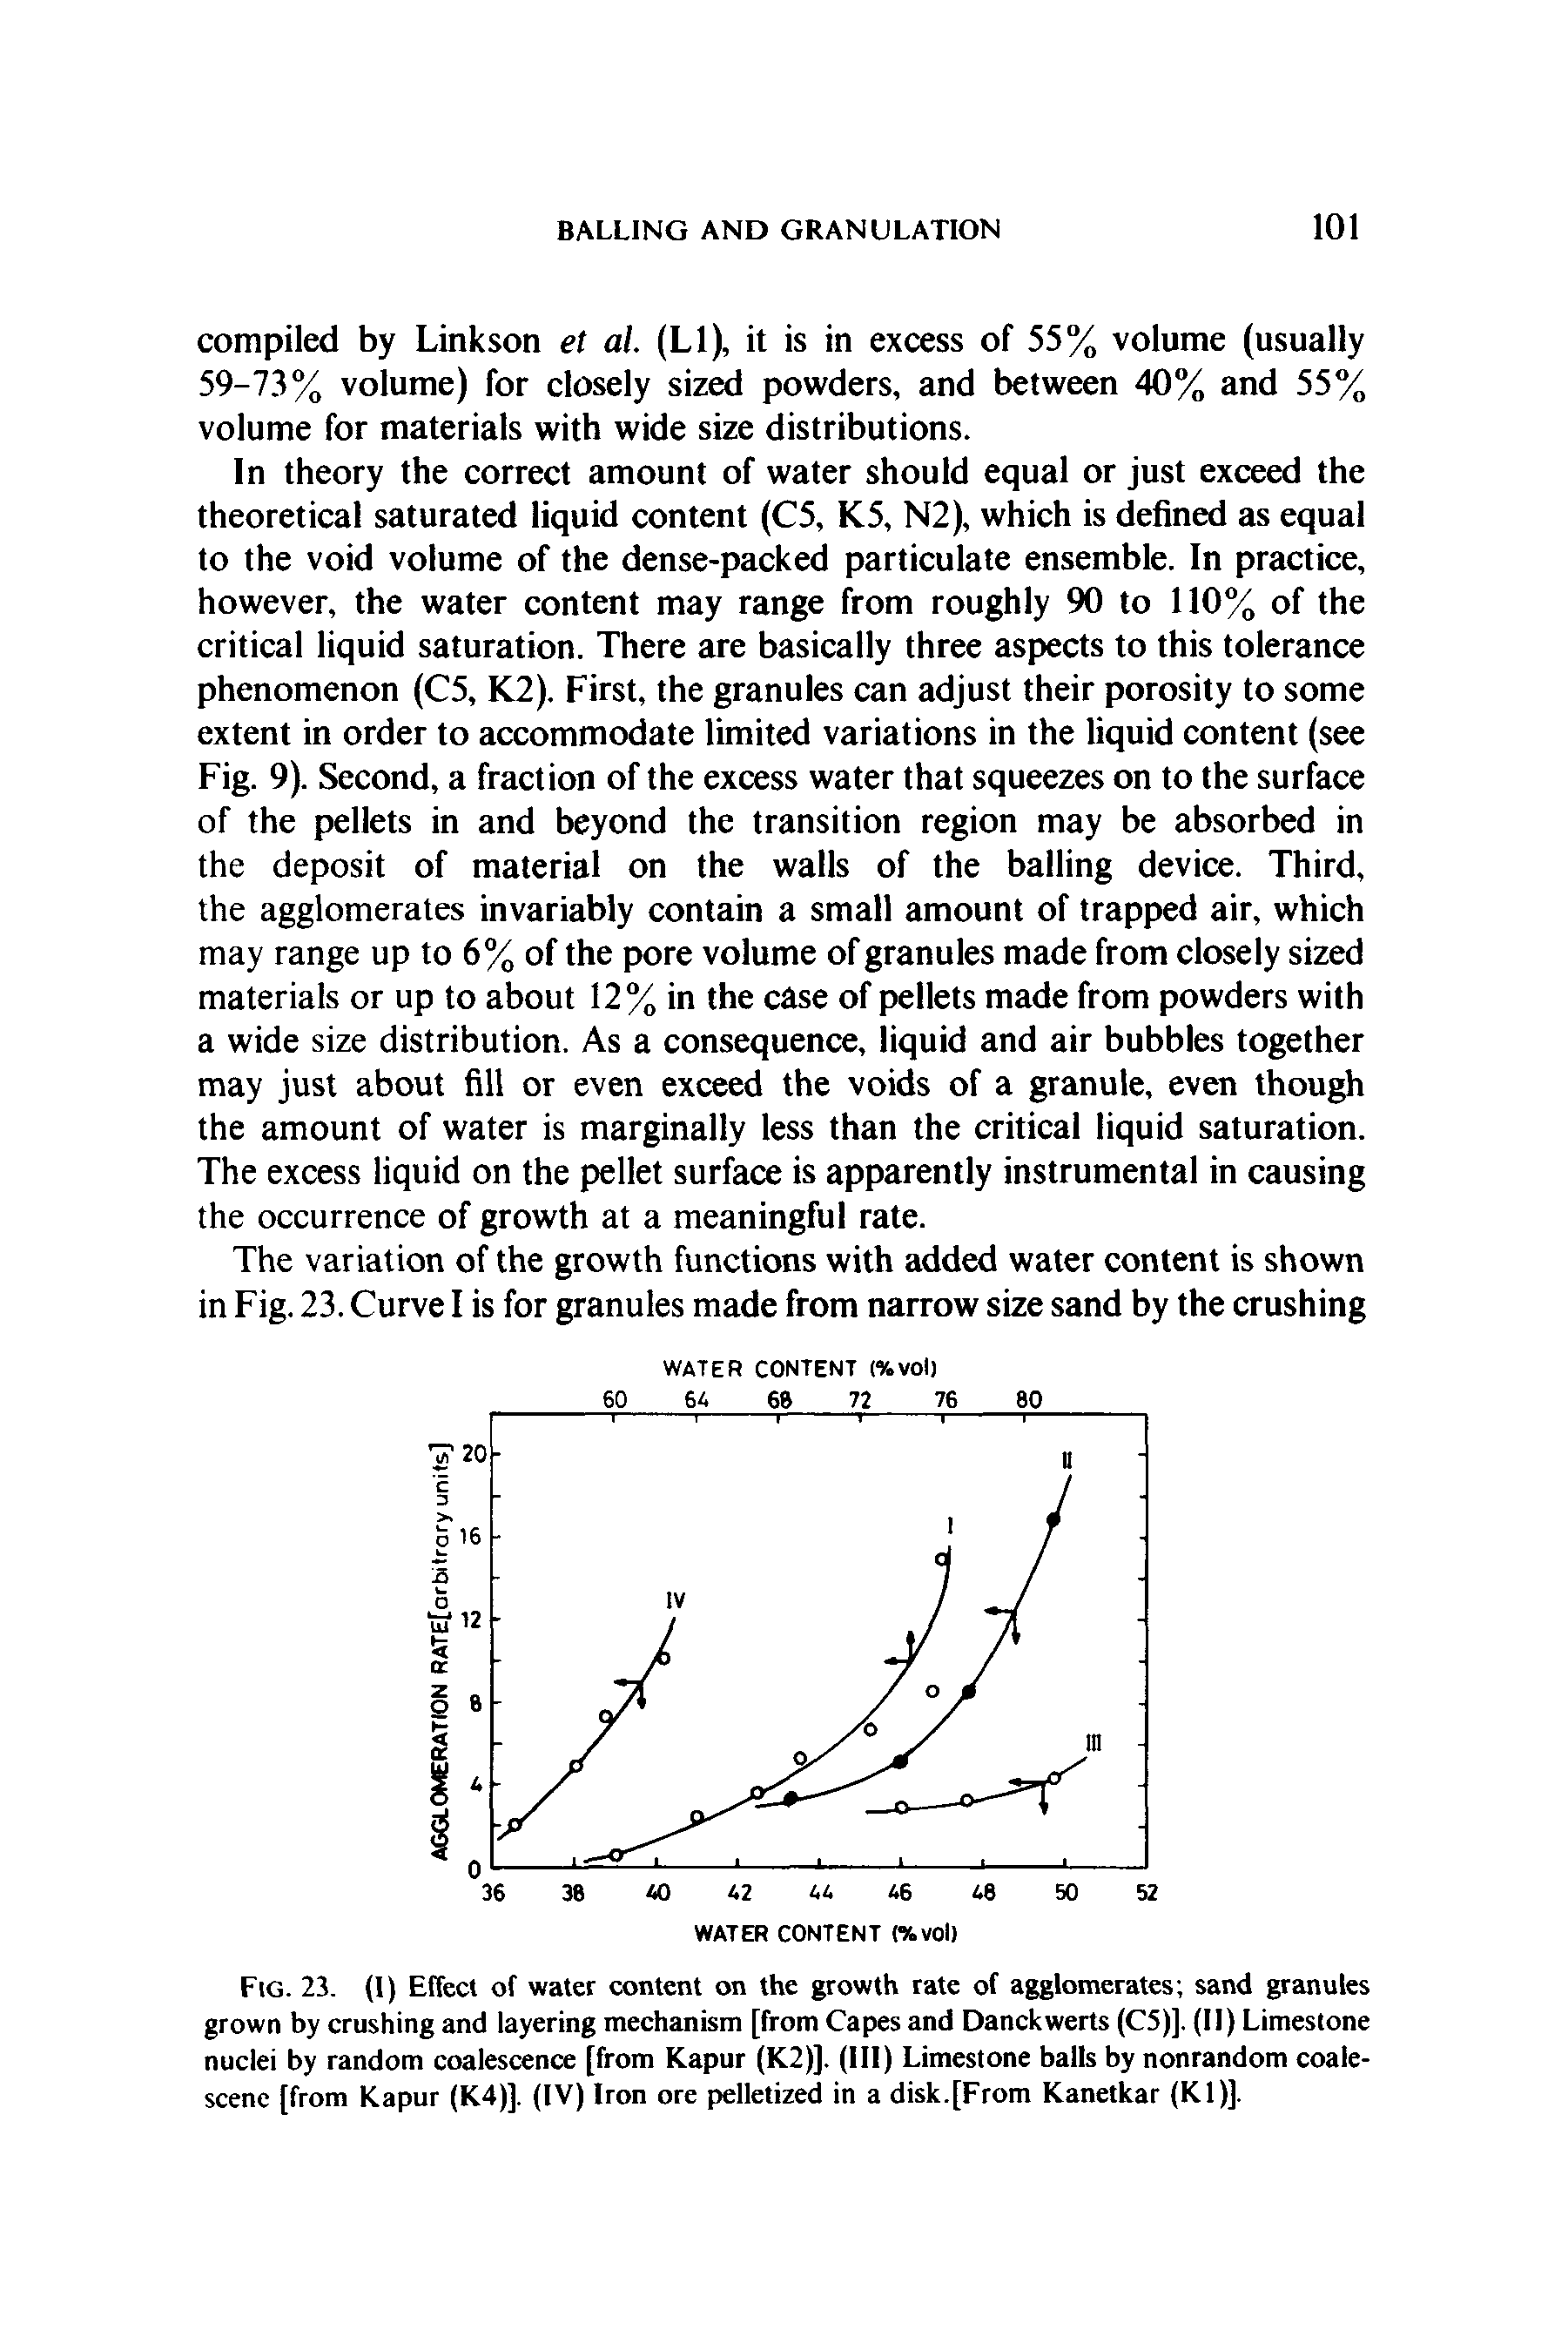 Fig. 23. (I) Effect of water content on the growth rate of agglomerates sand granules grown by crushing and layering mechanism [from Capes and Danckwerts (C5)]. (II) Limestone nuclei by random coalescence [from Kapur (K2)]. (Ill) Limestone balls by nonrandom coale-scene [from Kapur (K4)]. (IV) Iron ore pelletized in a disk.[From Kanetkar (K1)].